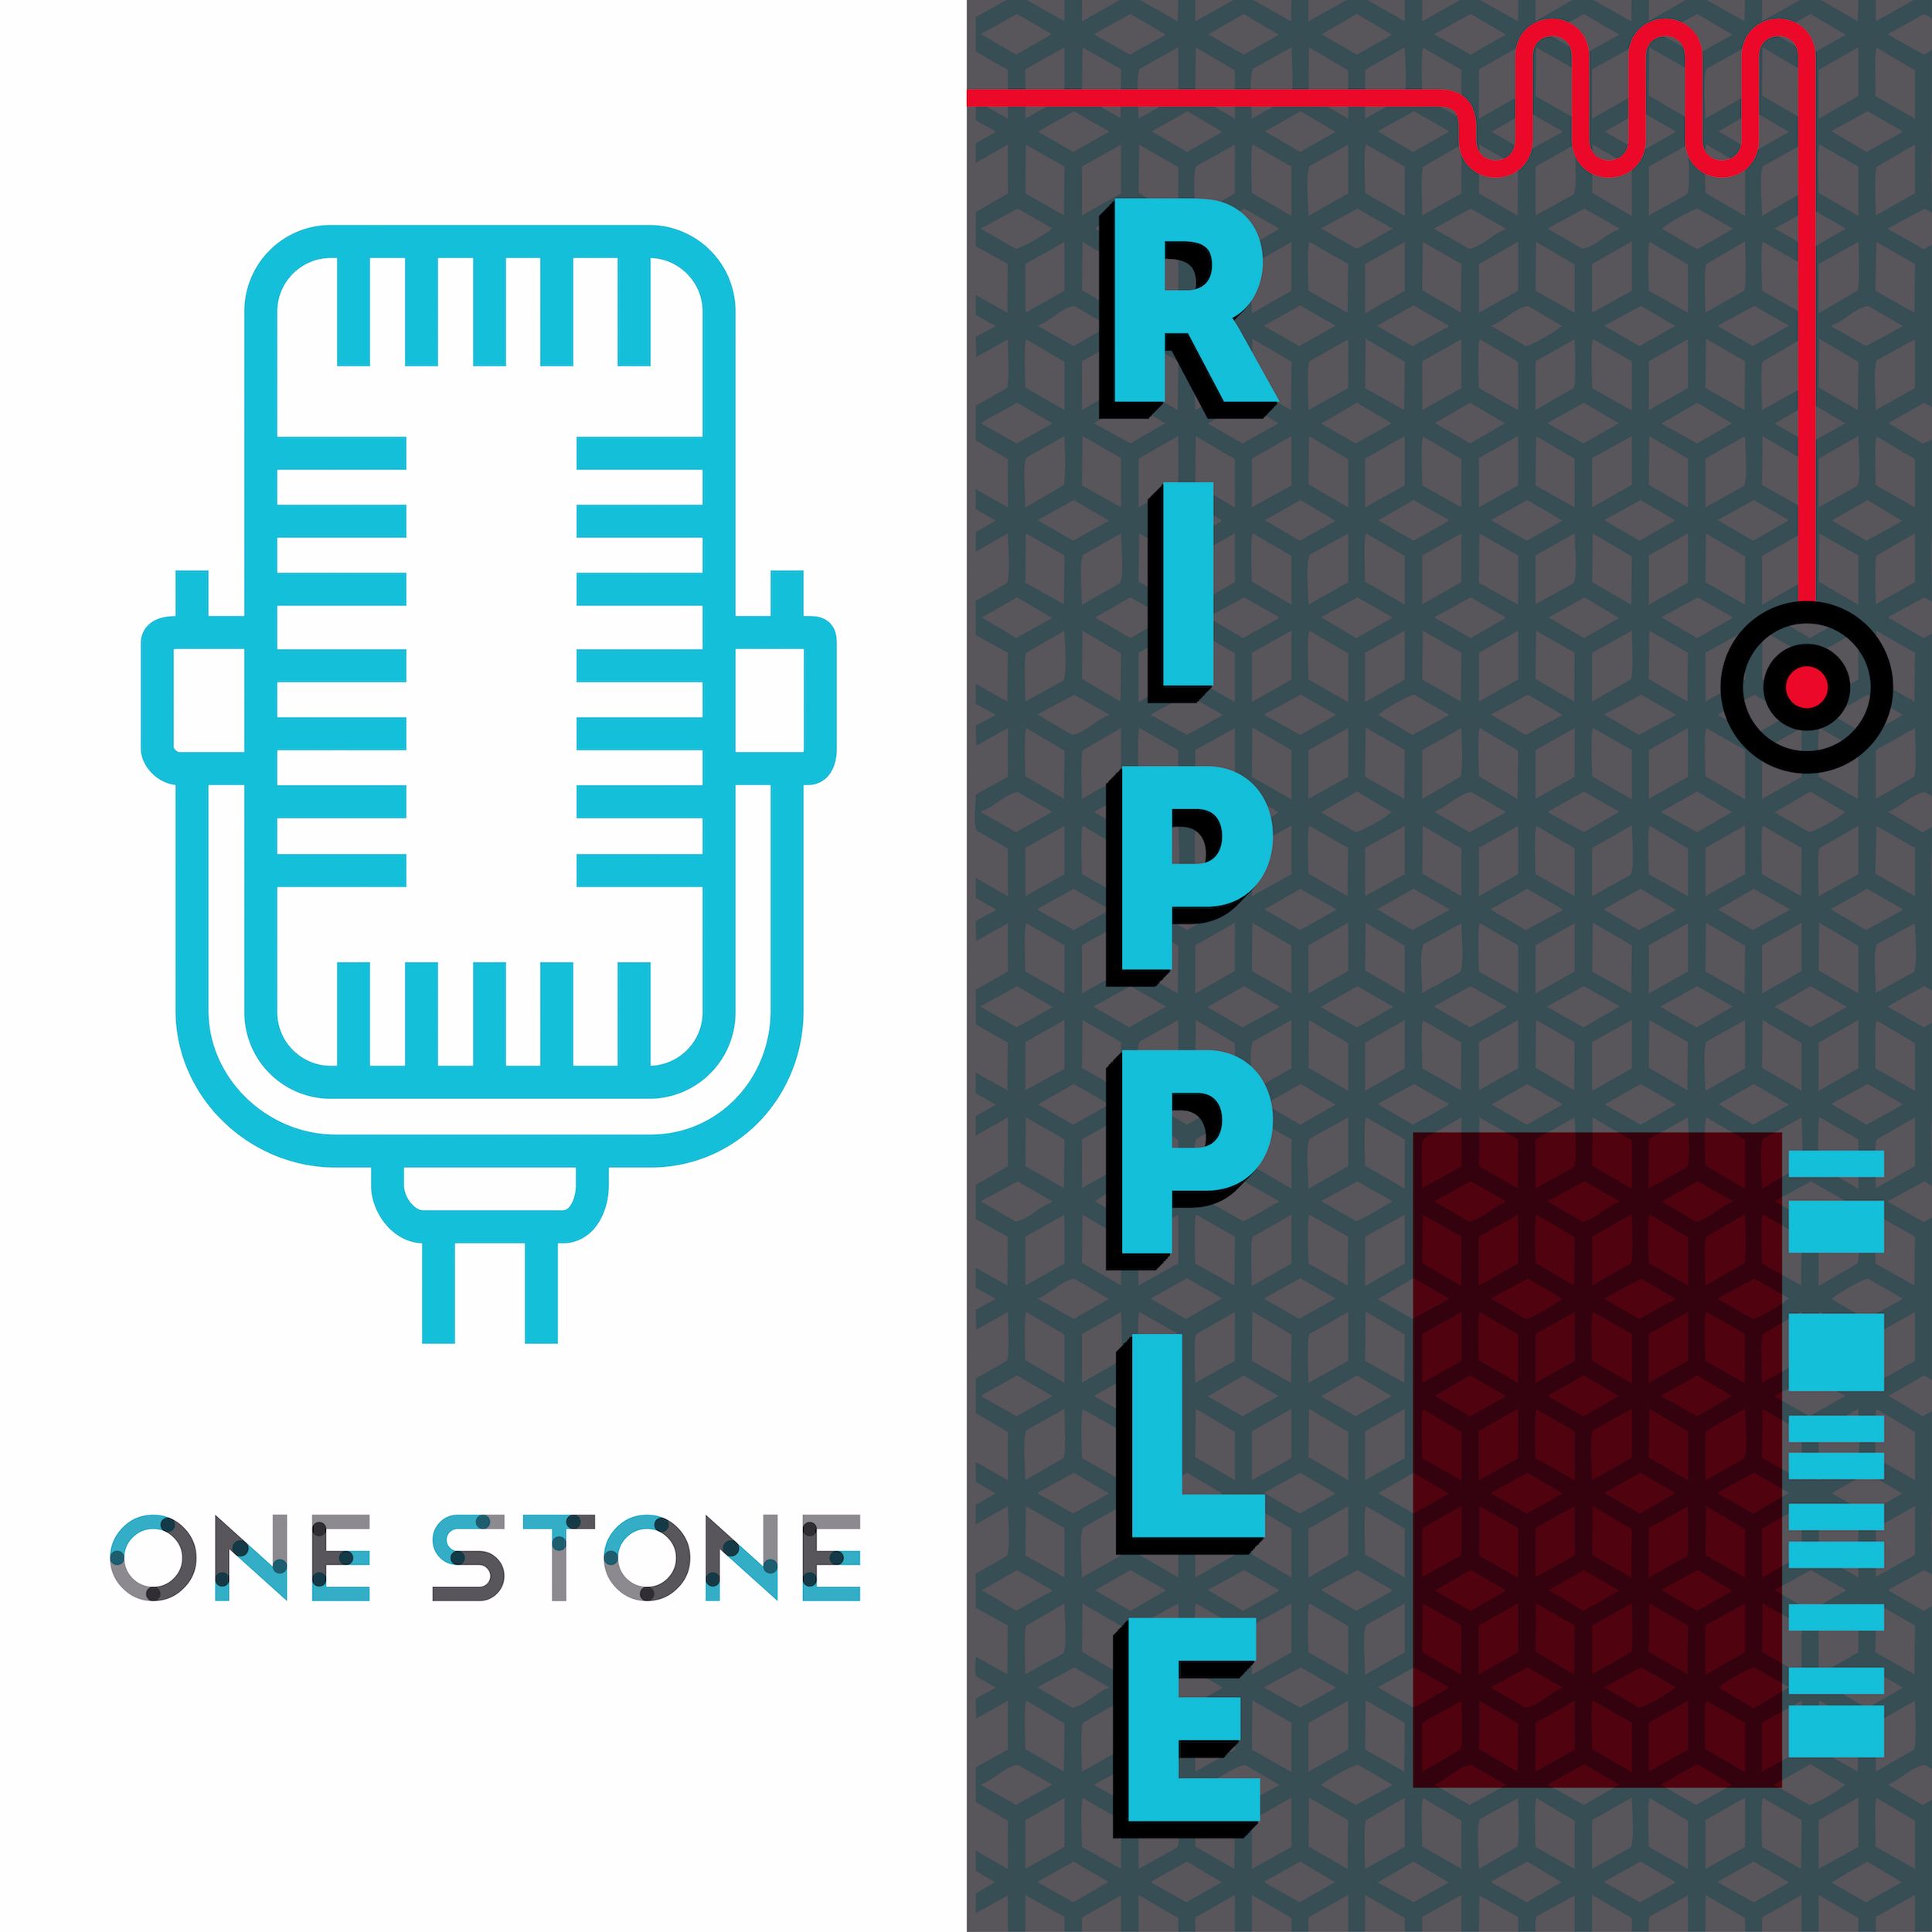 Ripple: The One Stone Podcast